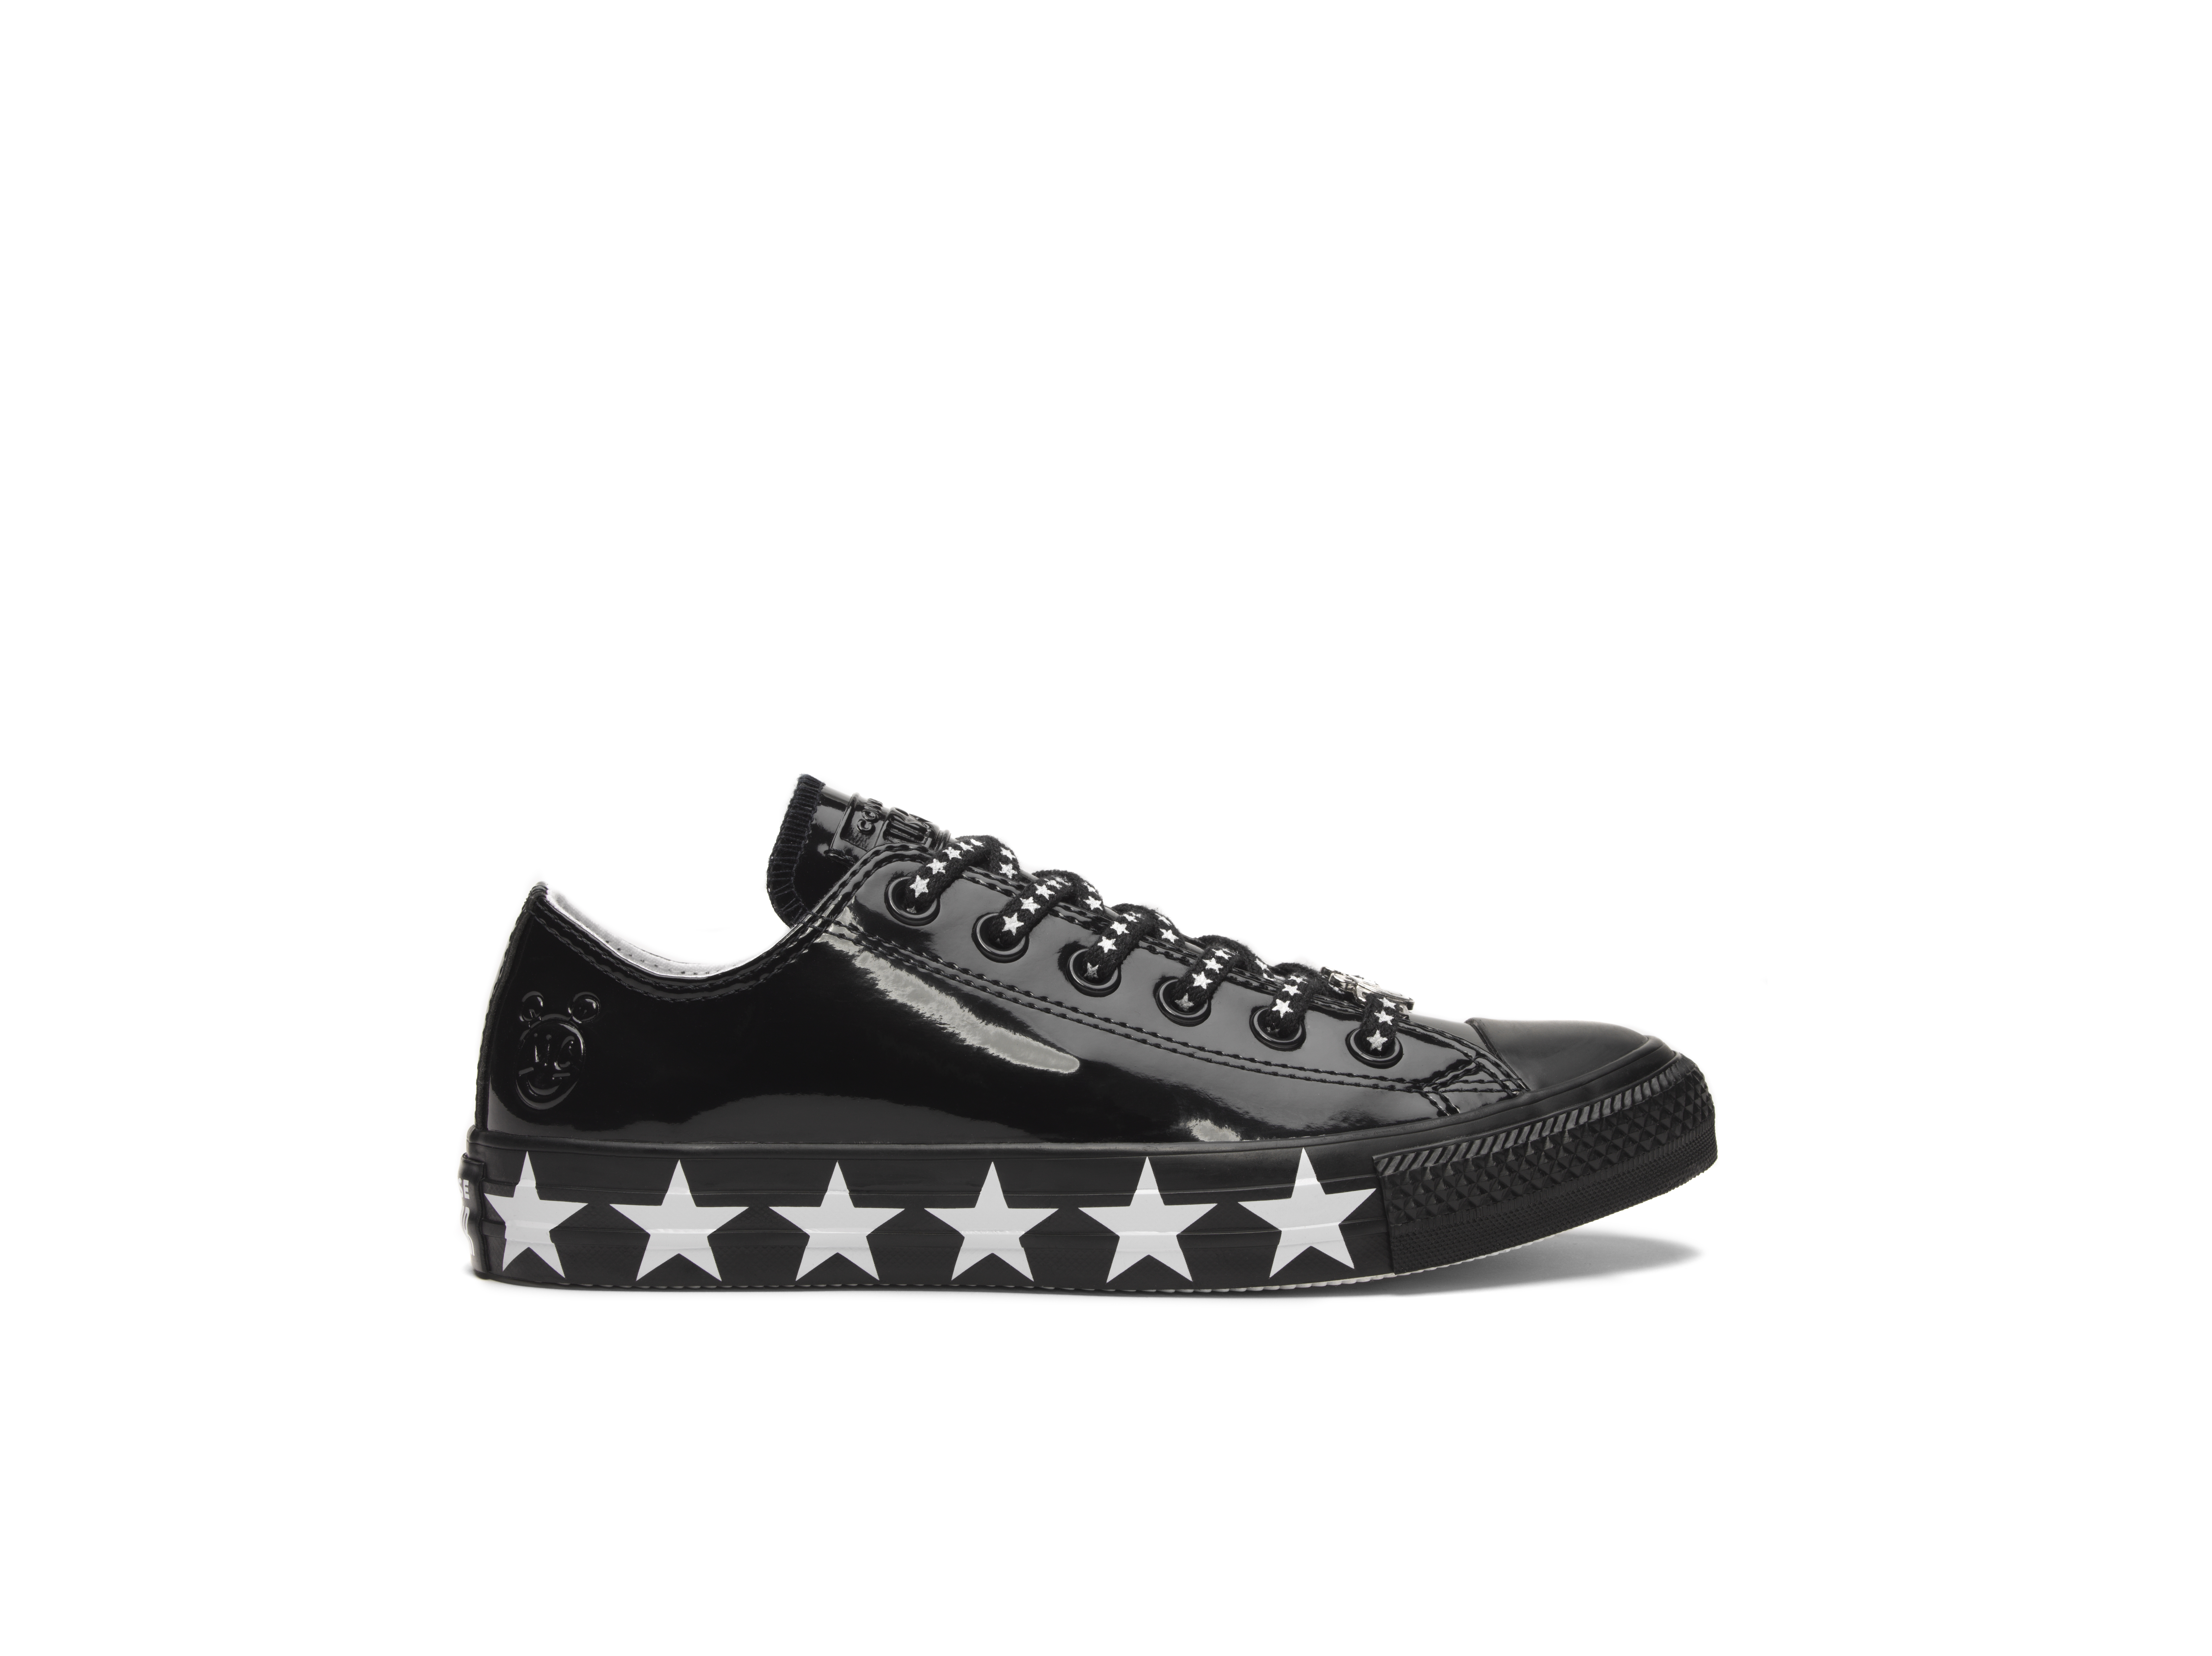 converse x miley cyrus chuck taylor all star high top faux patent